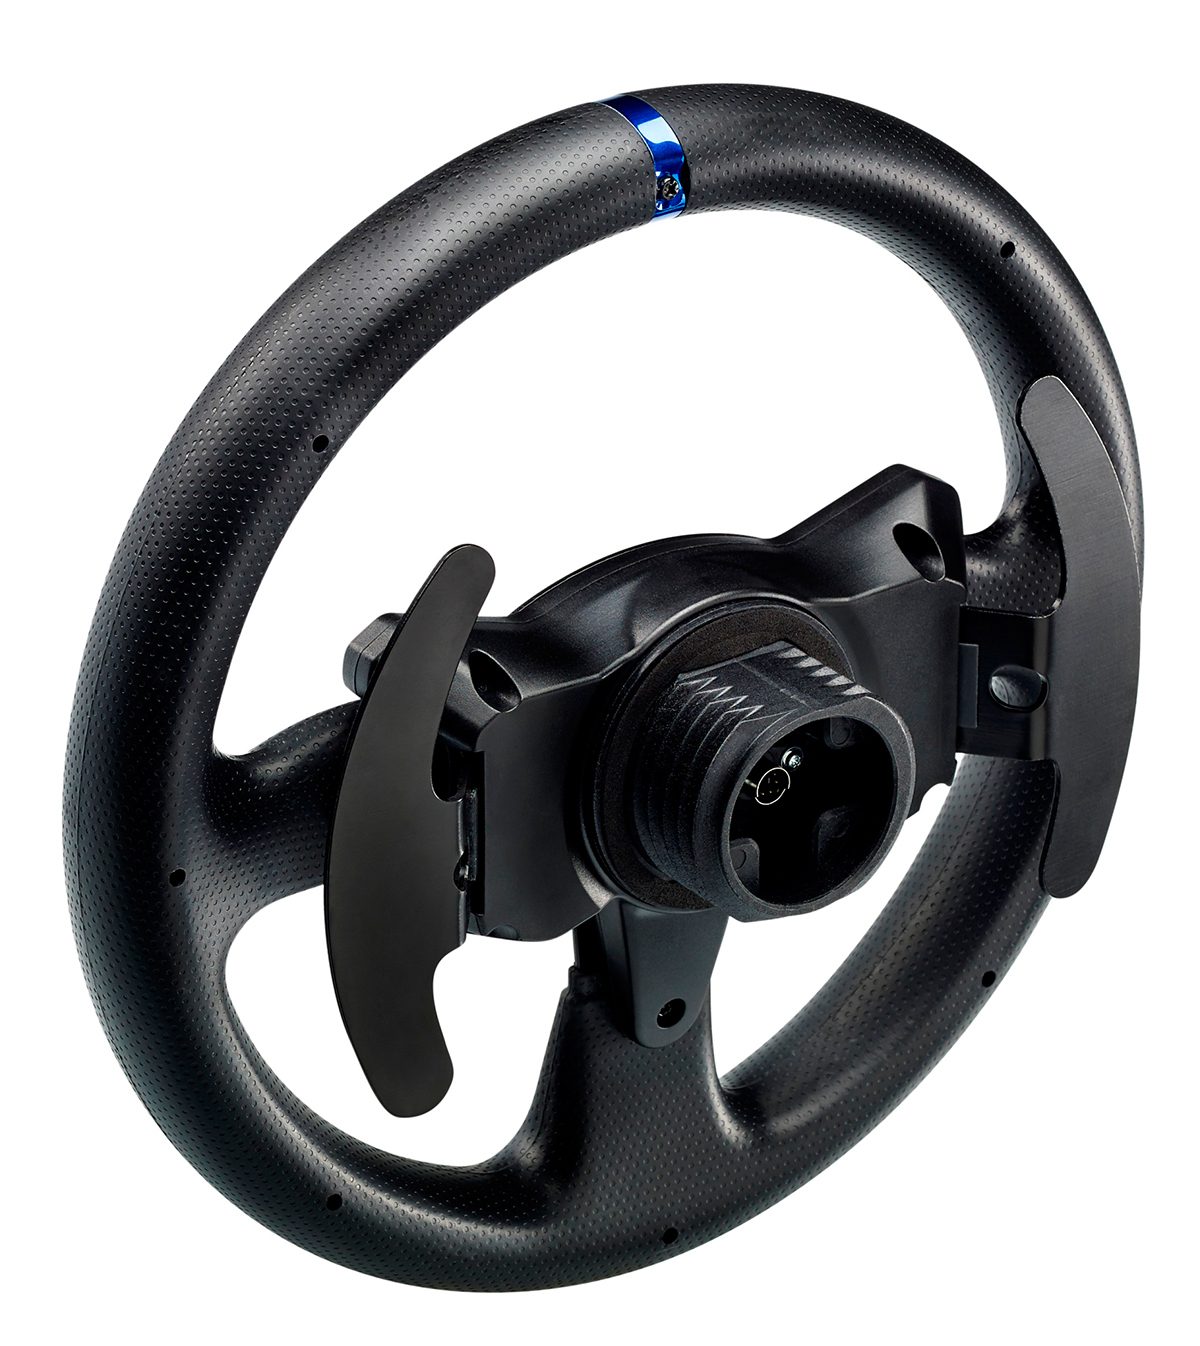 Thrustmaster T300 RS Review